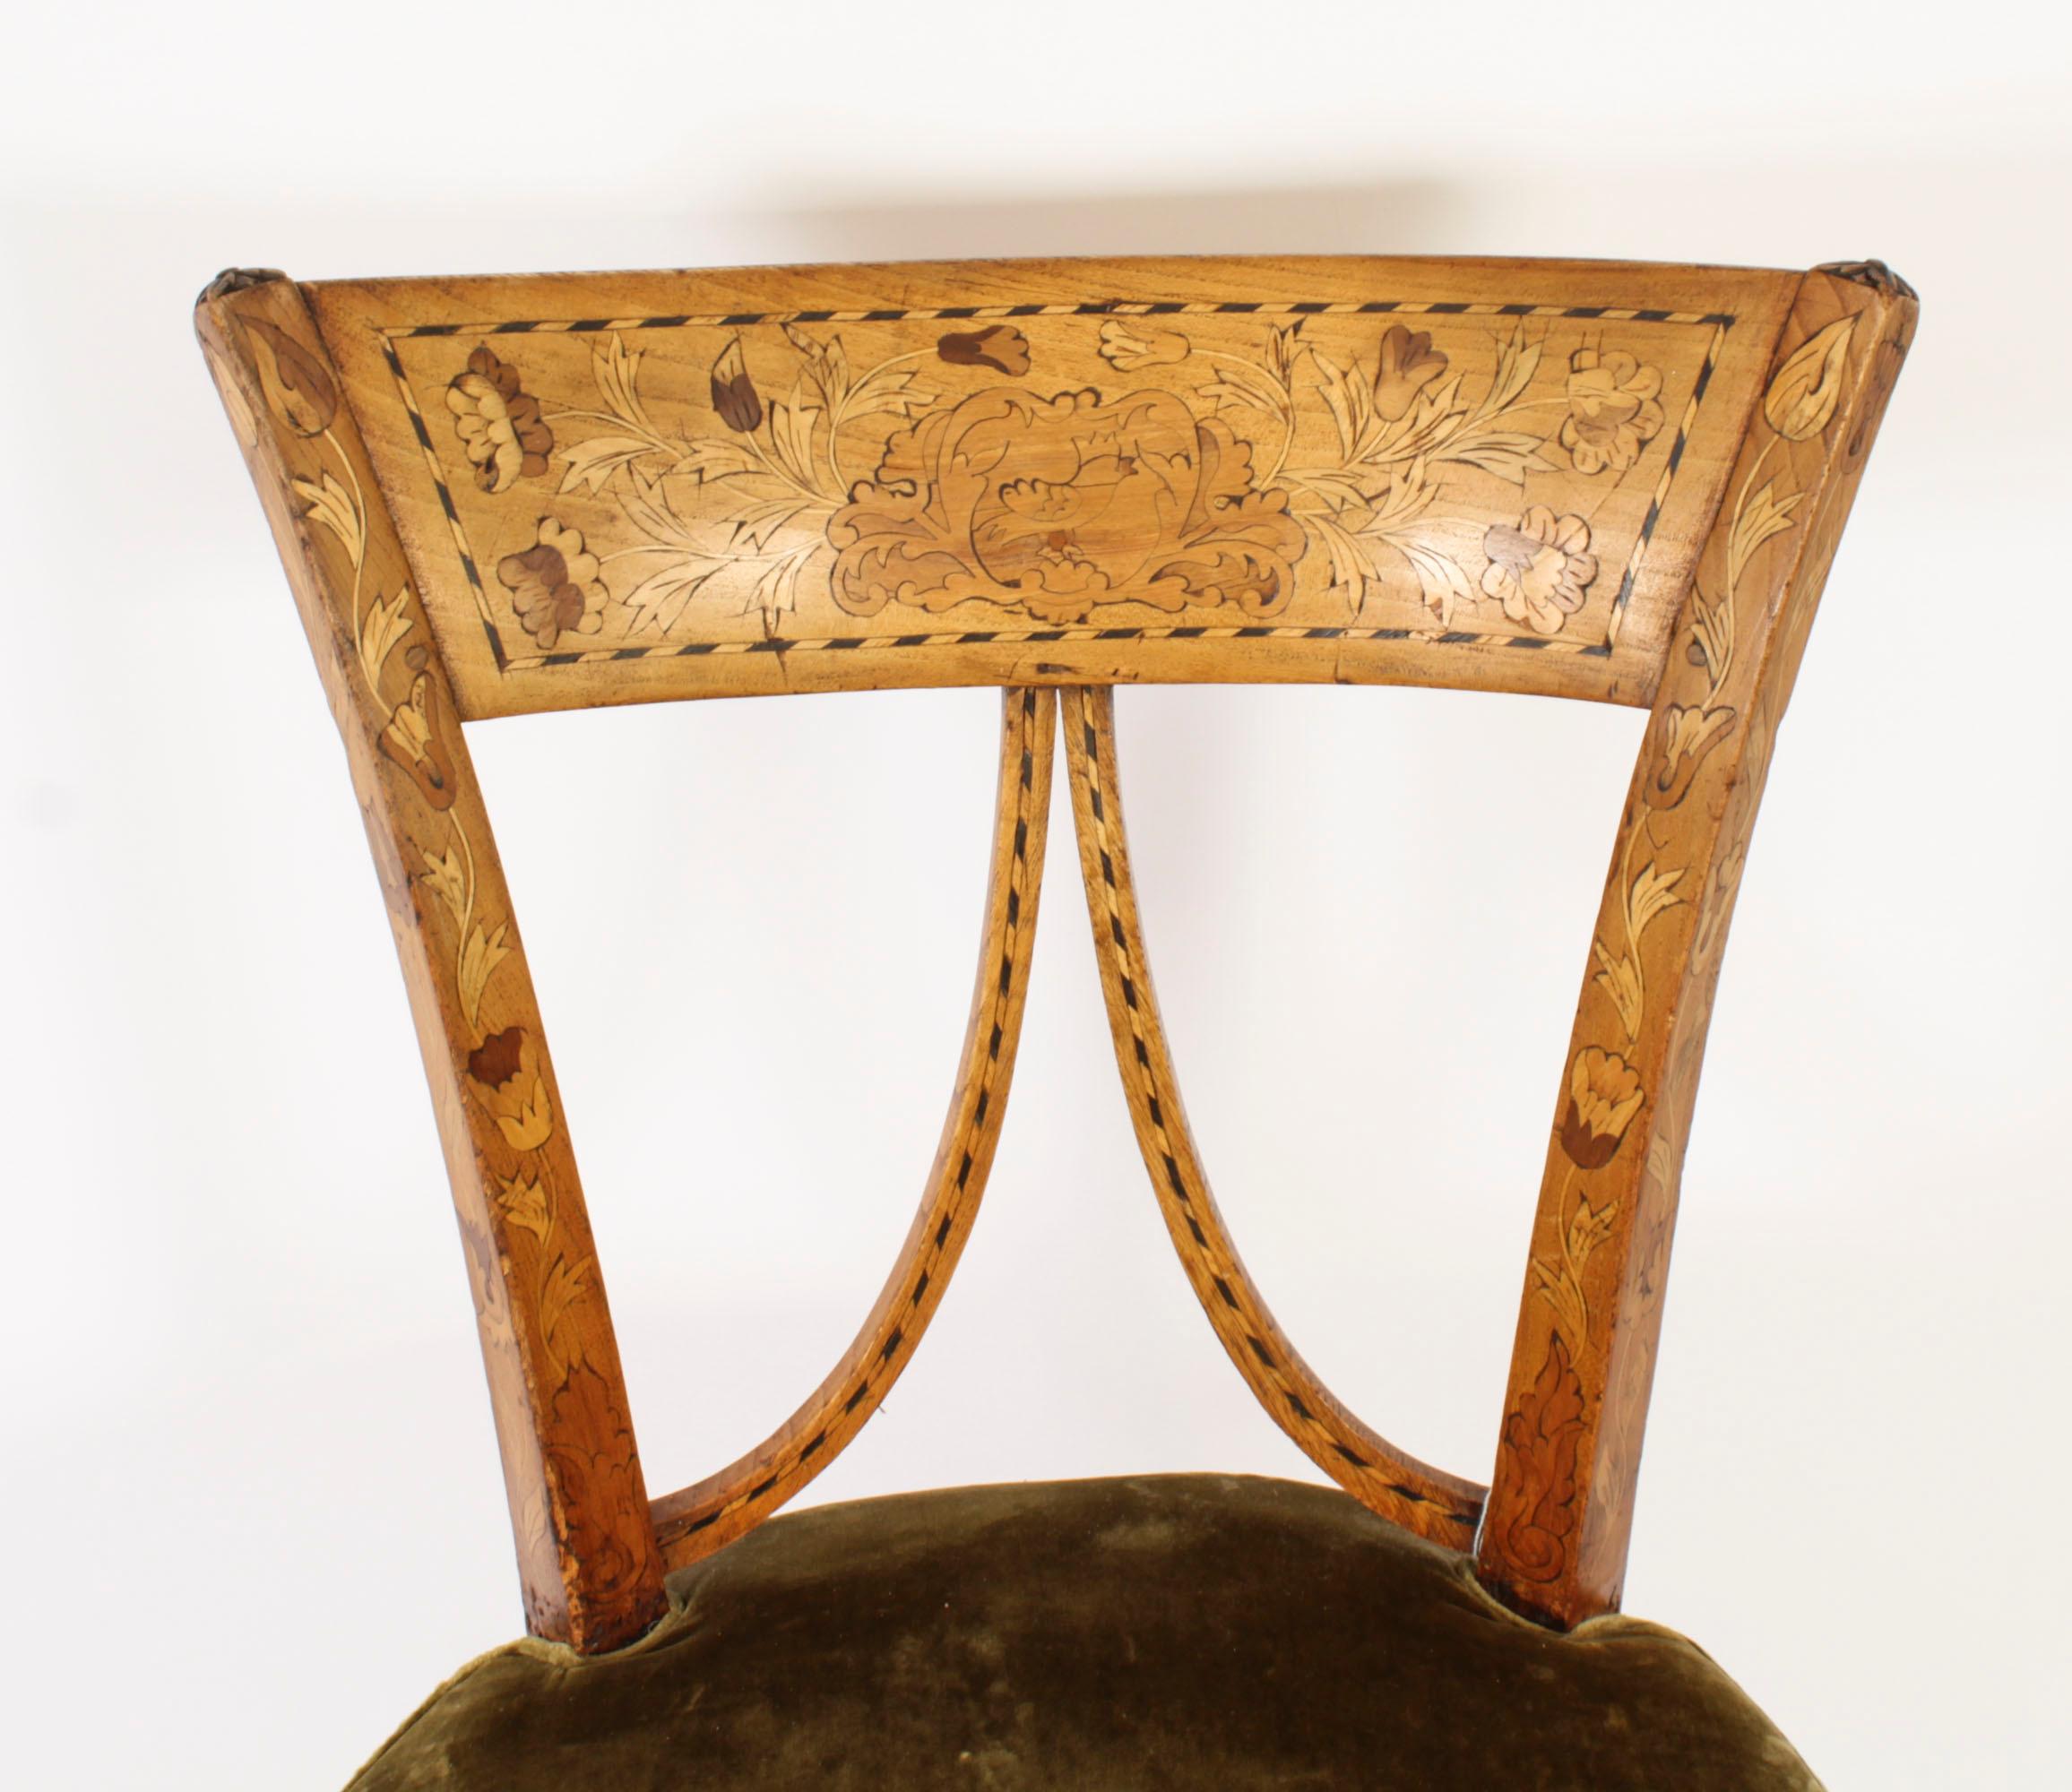 English Antique Dutch Satinwood Marquetry Desk Chair 19th Century For Sale